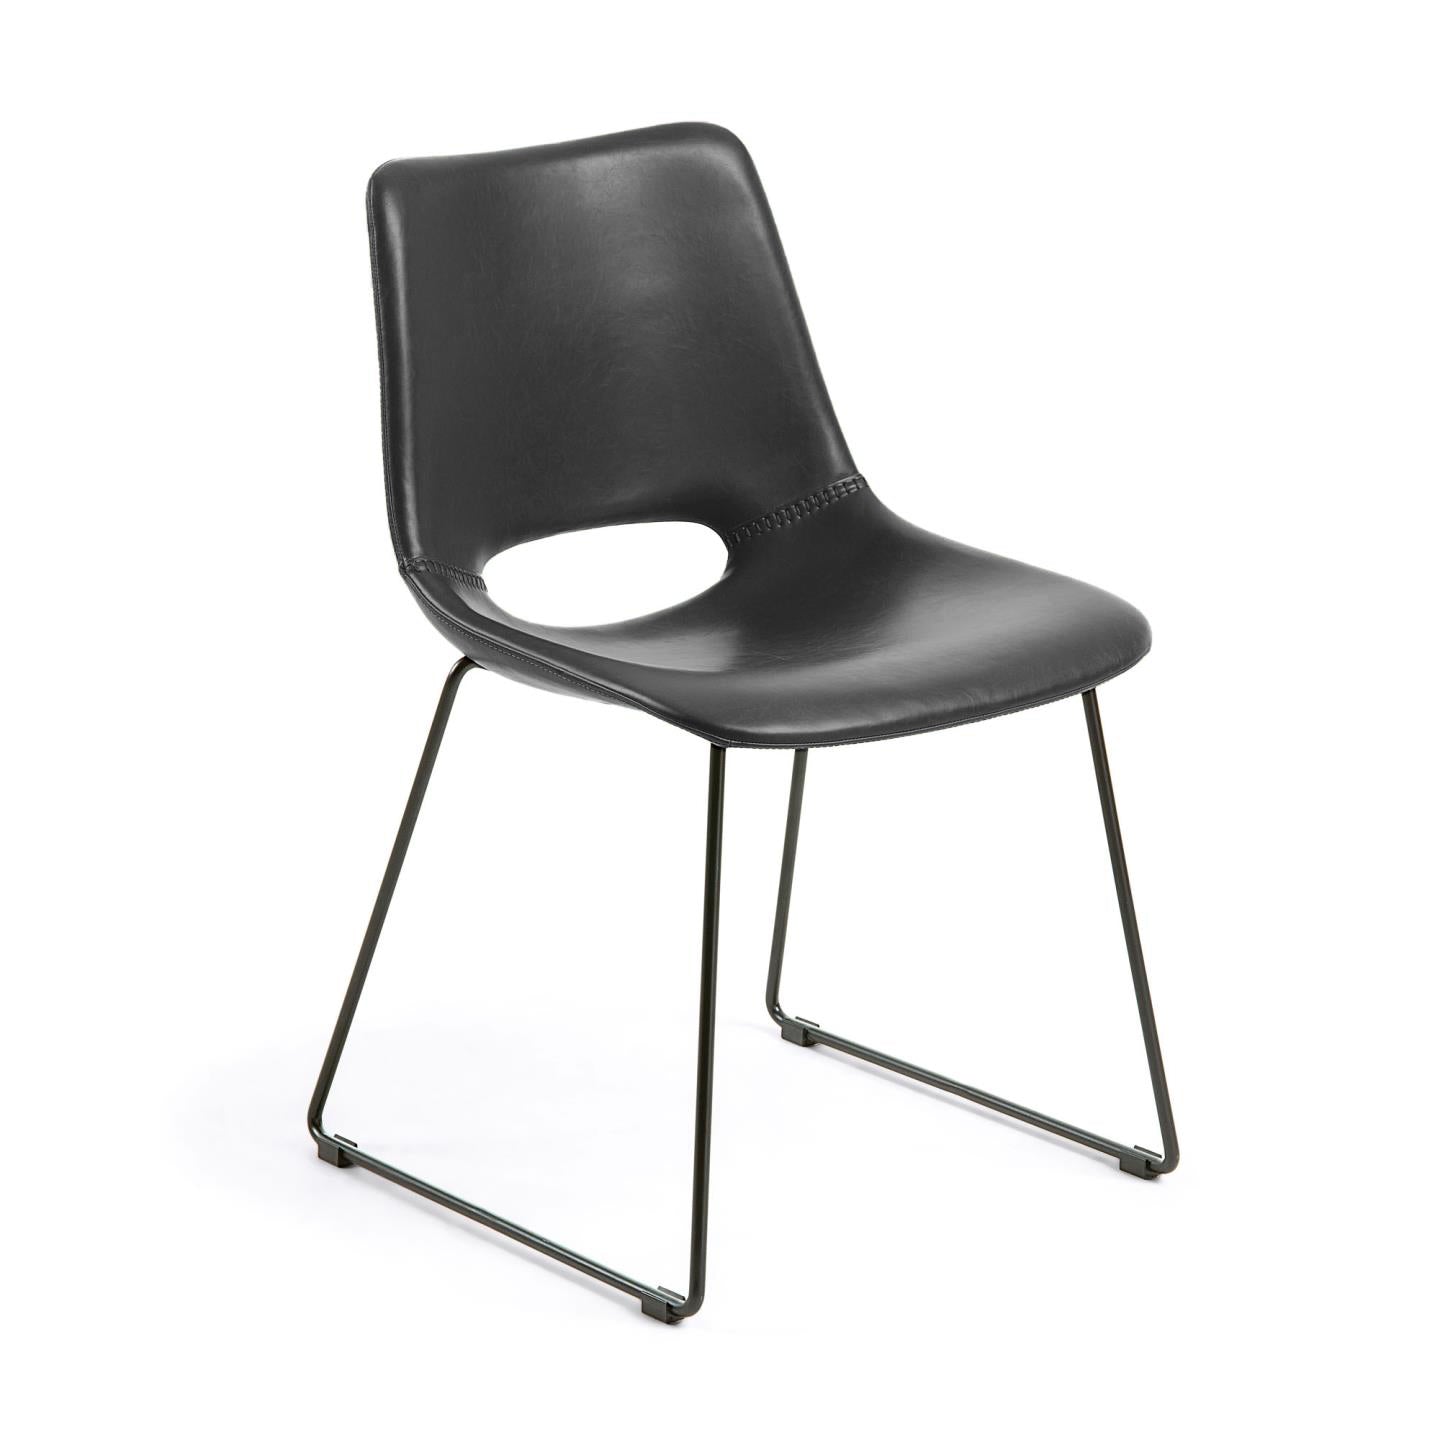 Zahara black chair with steel legs with black finish